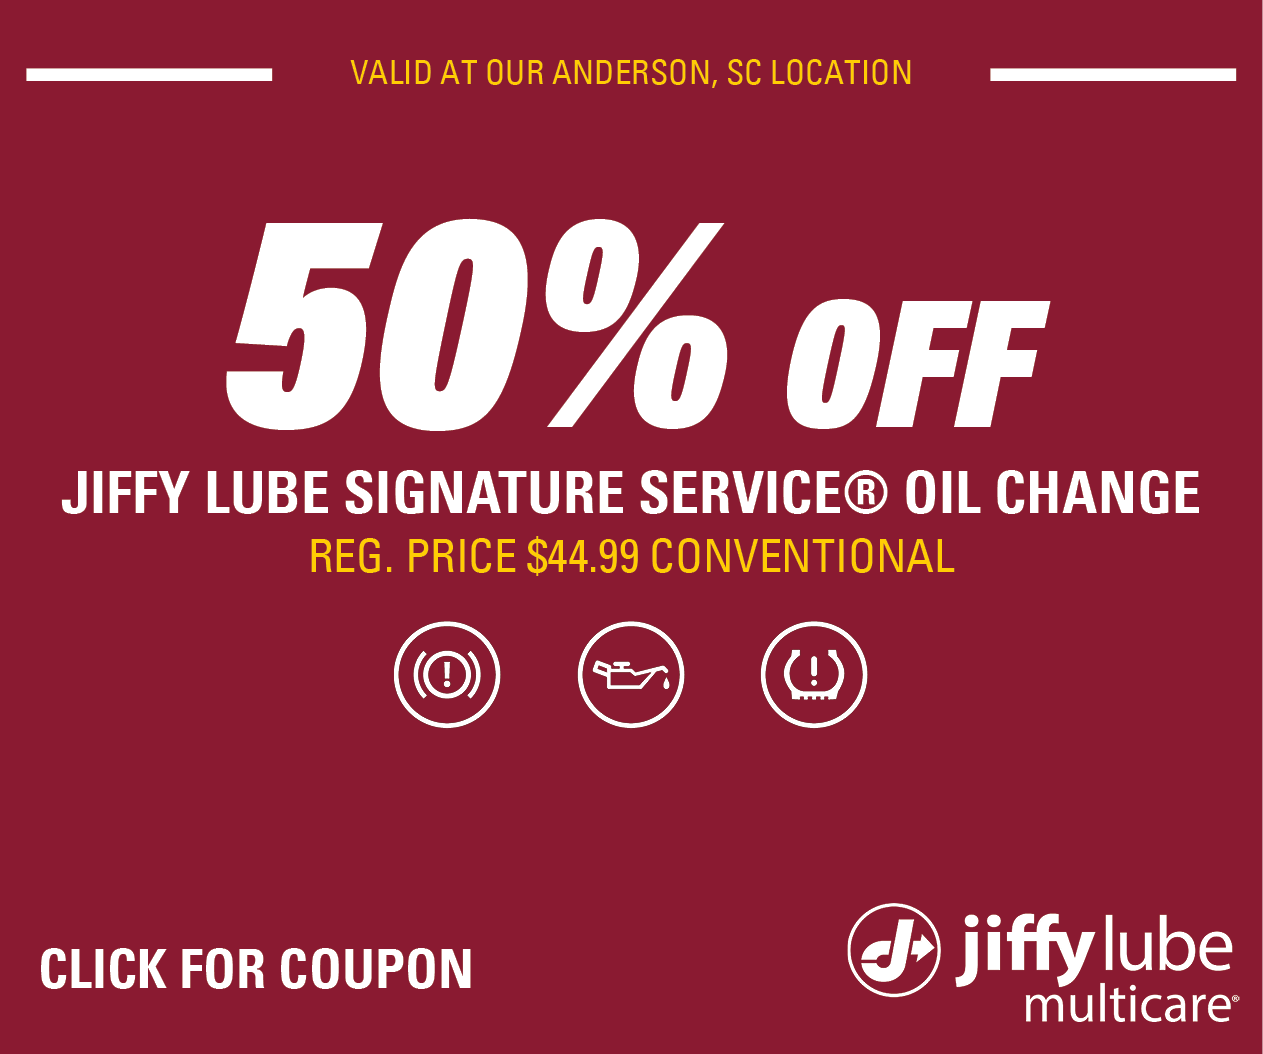 50% OFF Conventional SSOC Anderson Display Ad Website Image (Bronco Lube)